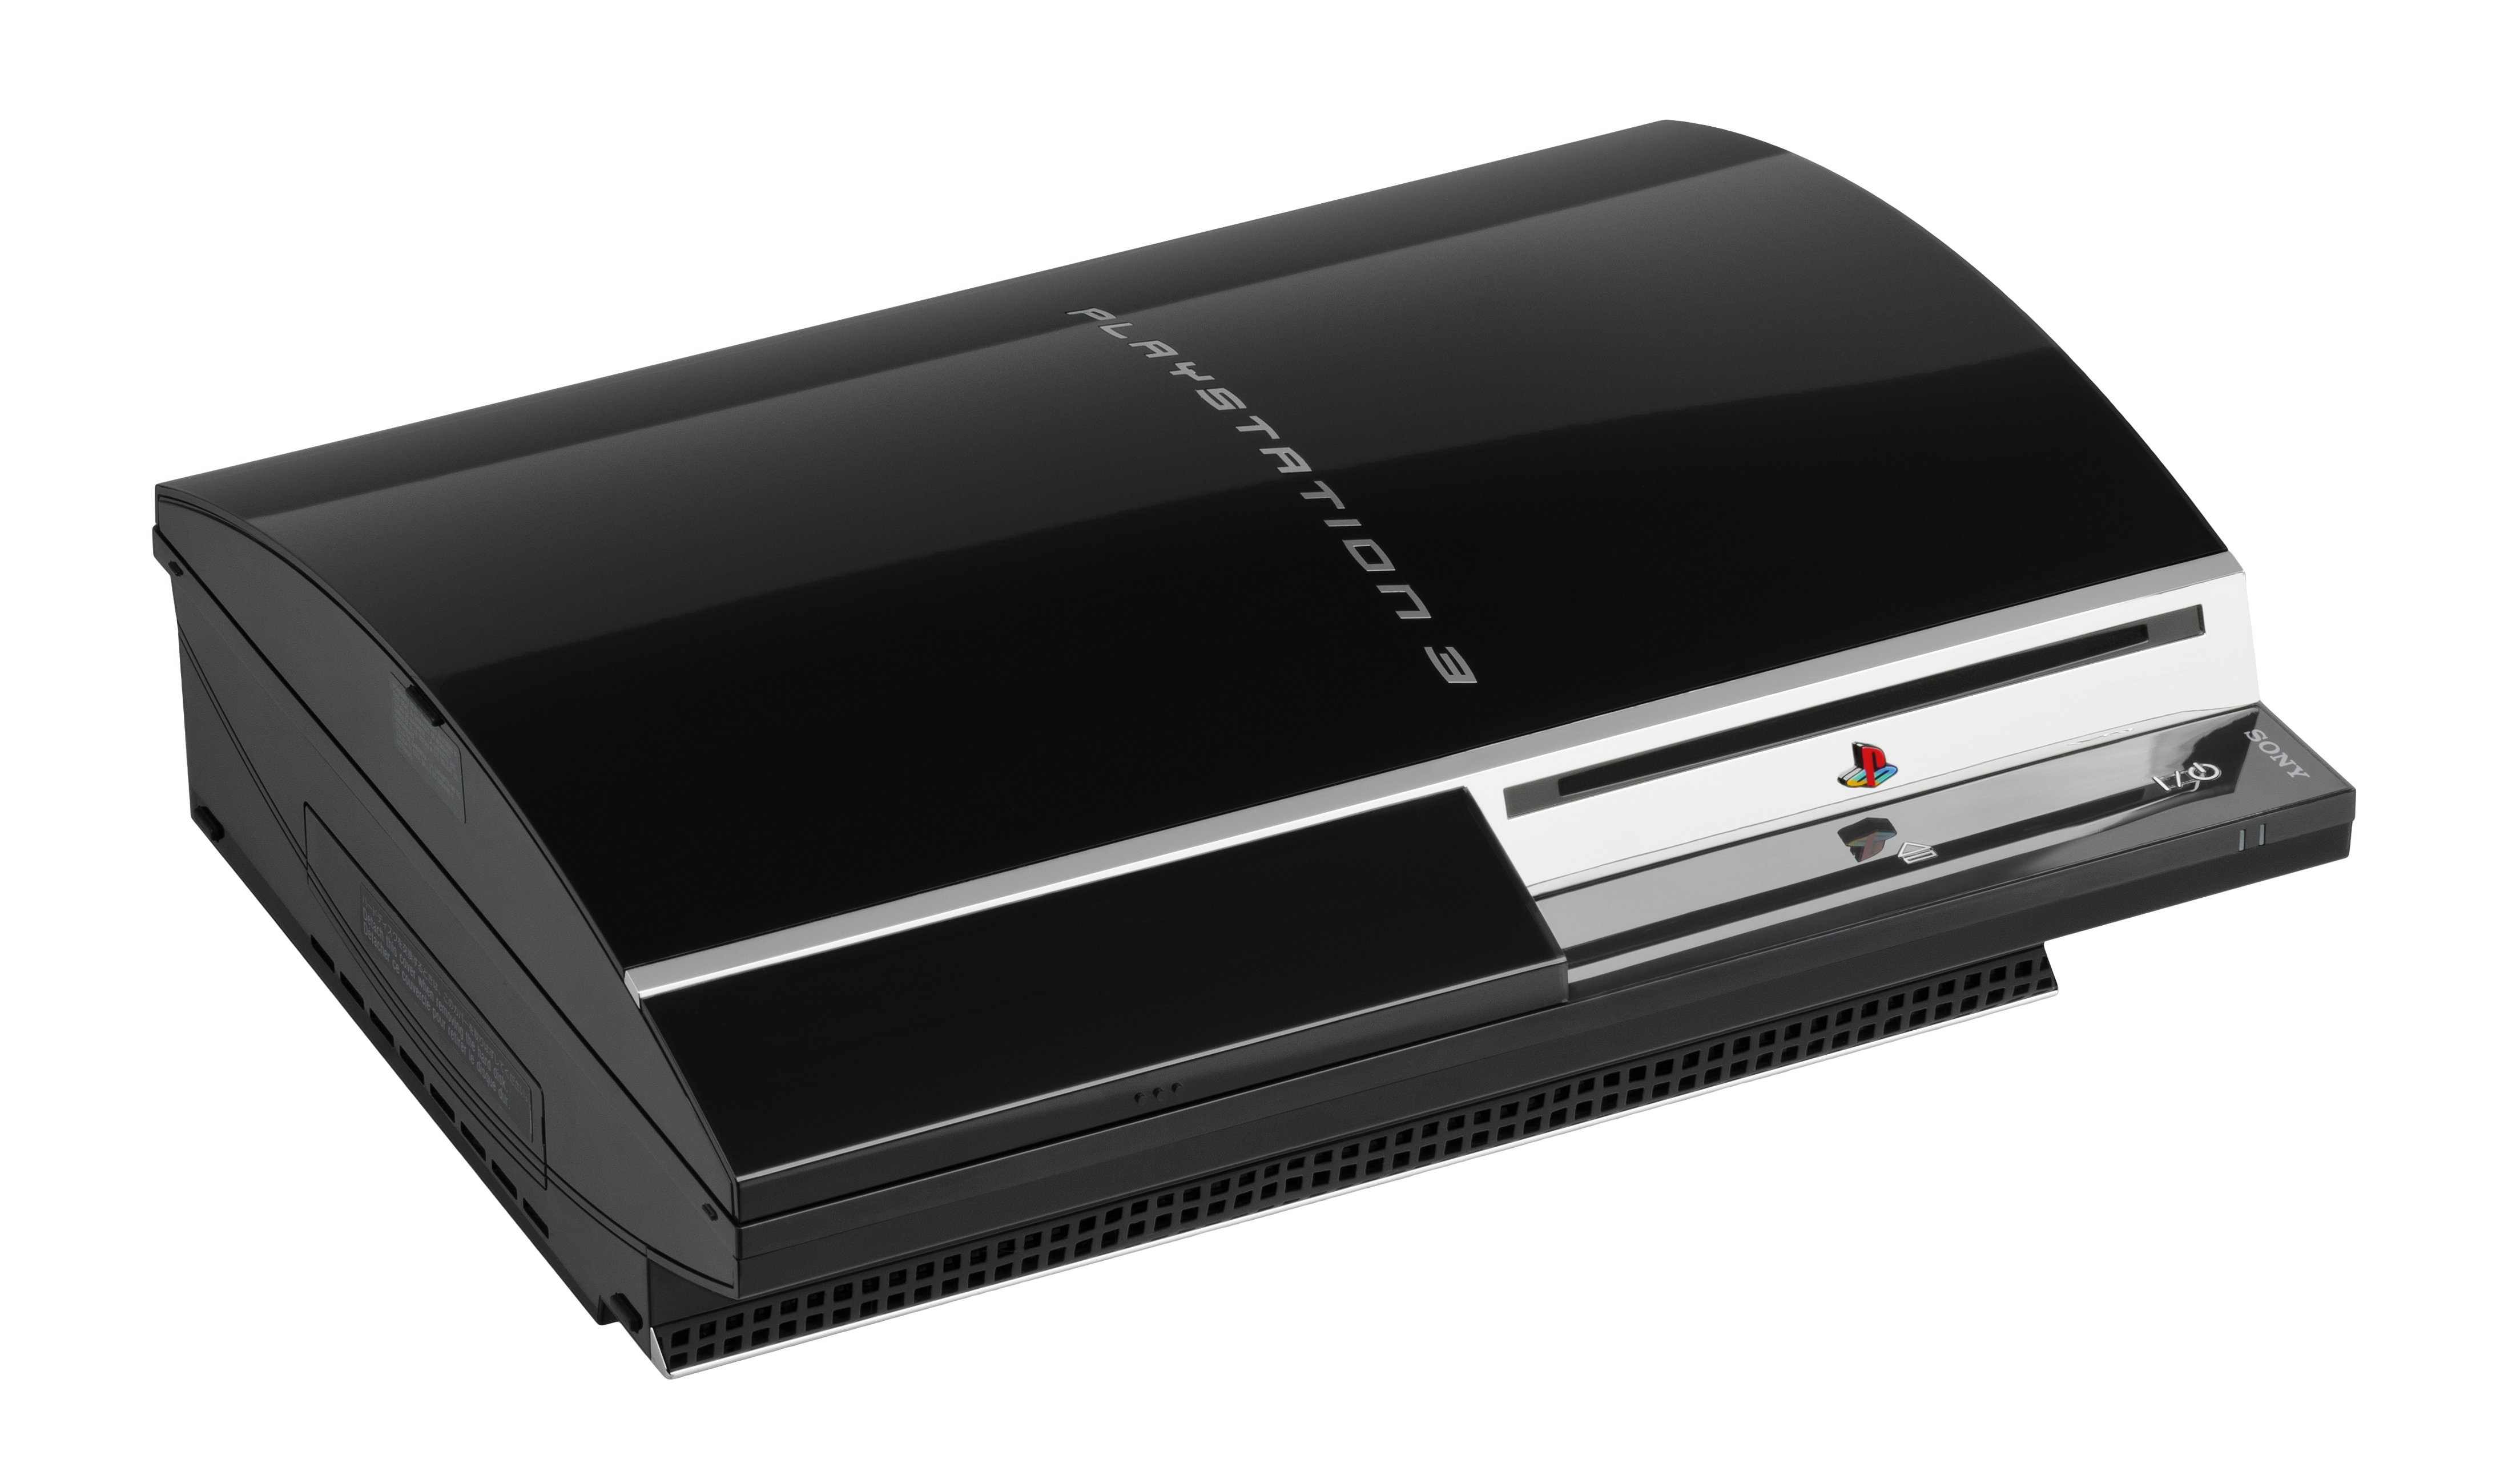 PS3 Launch Was Reportedly Delayed Due to $0.05 Component